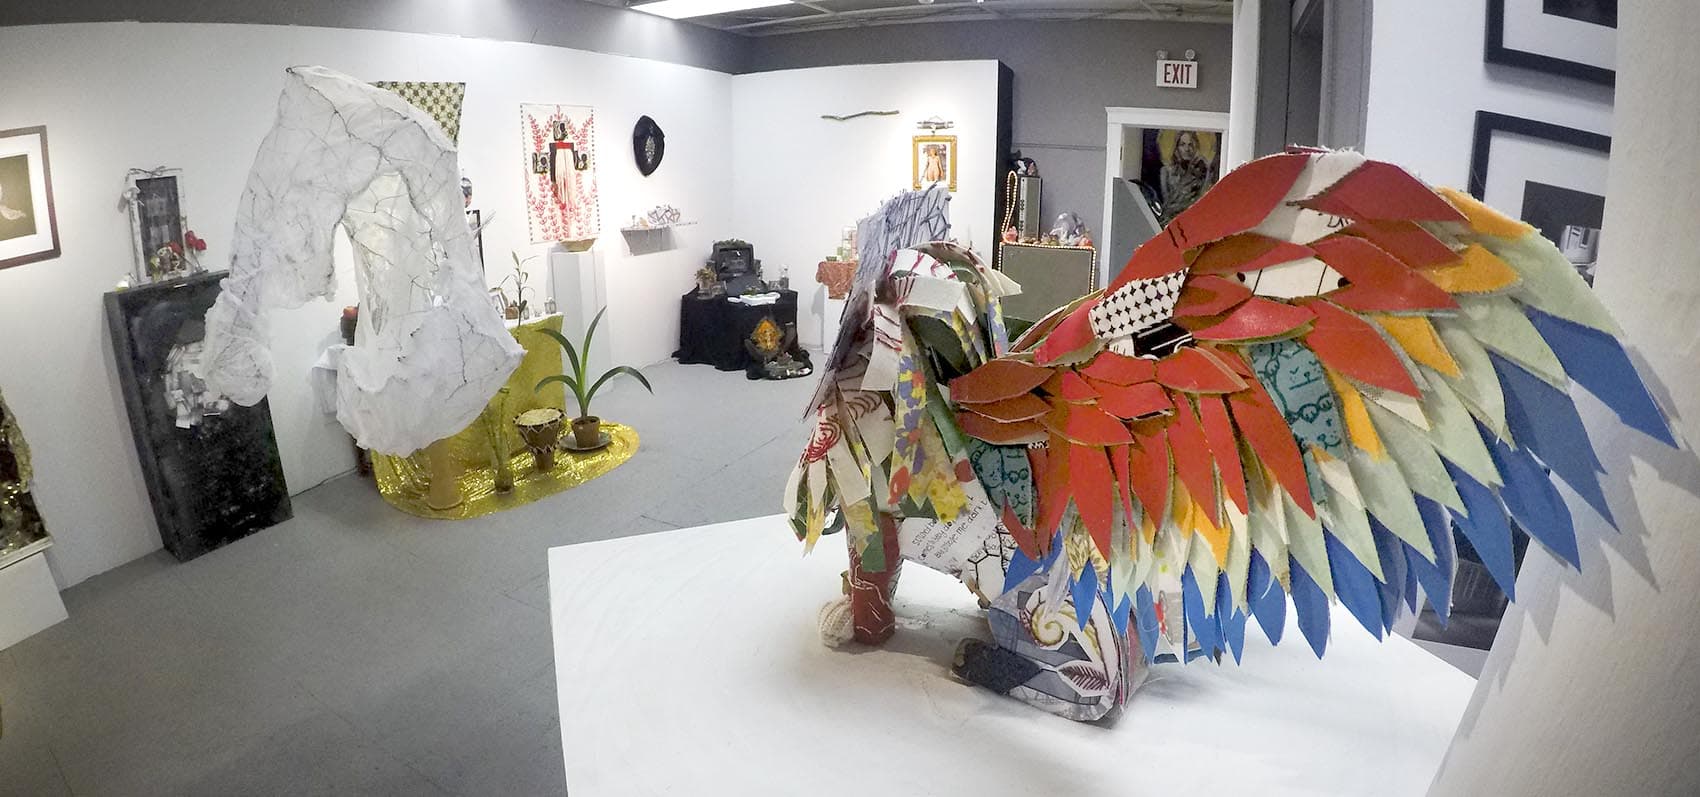 &quot;Altarations,&quot; which opens July 21, at the Dorchester Art Project. (Robin Lubbock/WBUR)